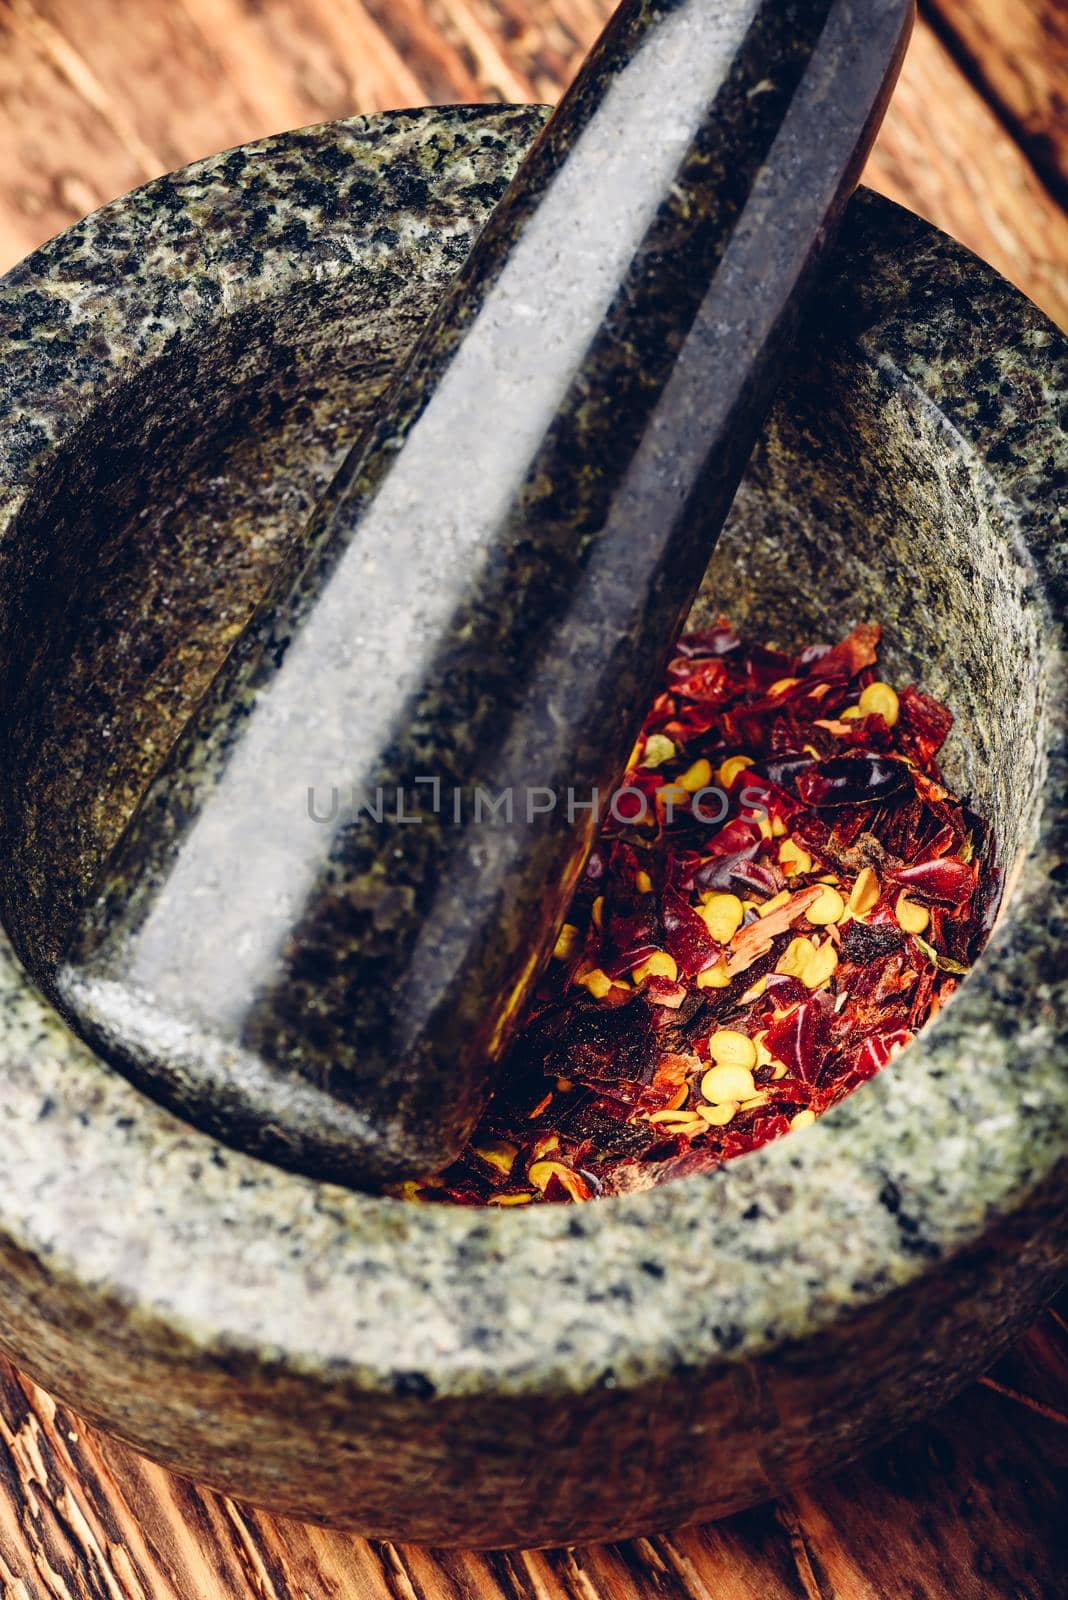 Grinded red chili pepper by Seva_blsv